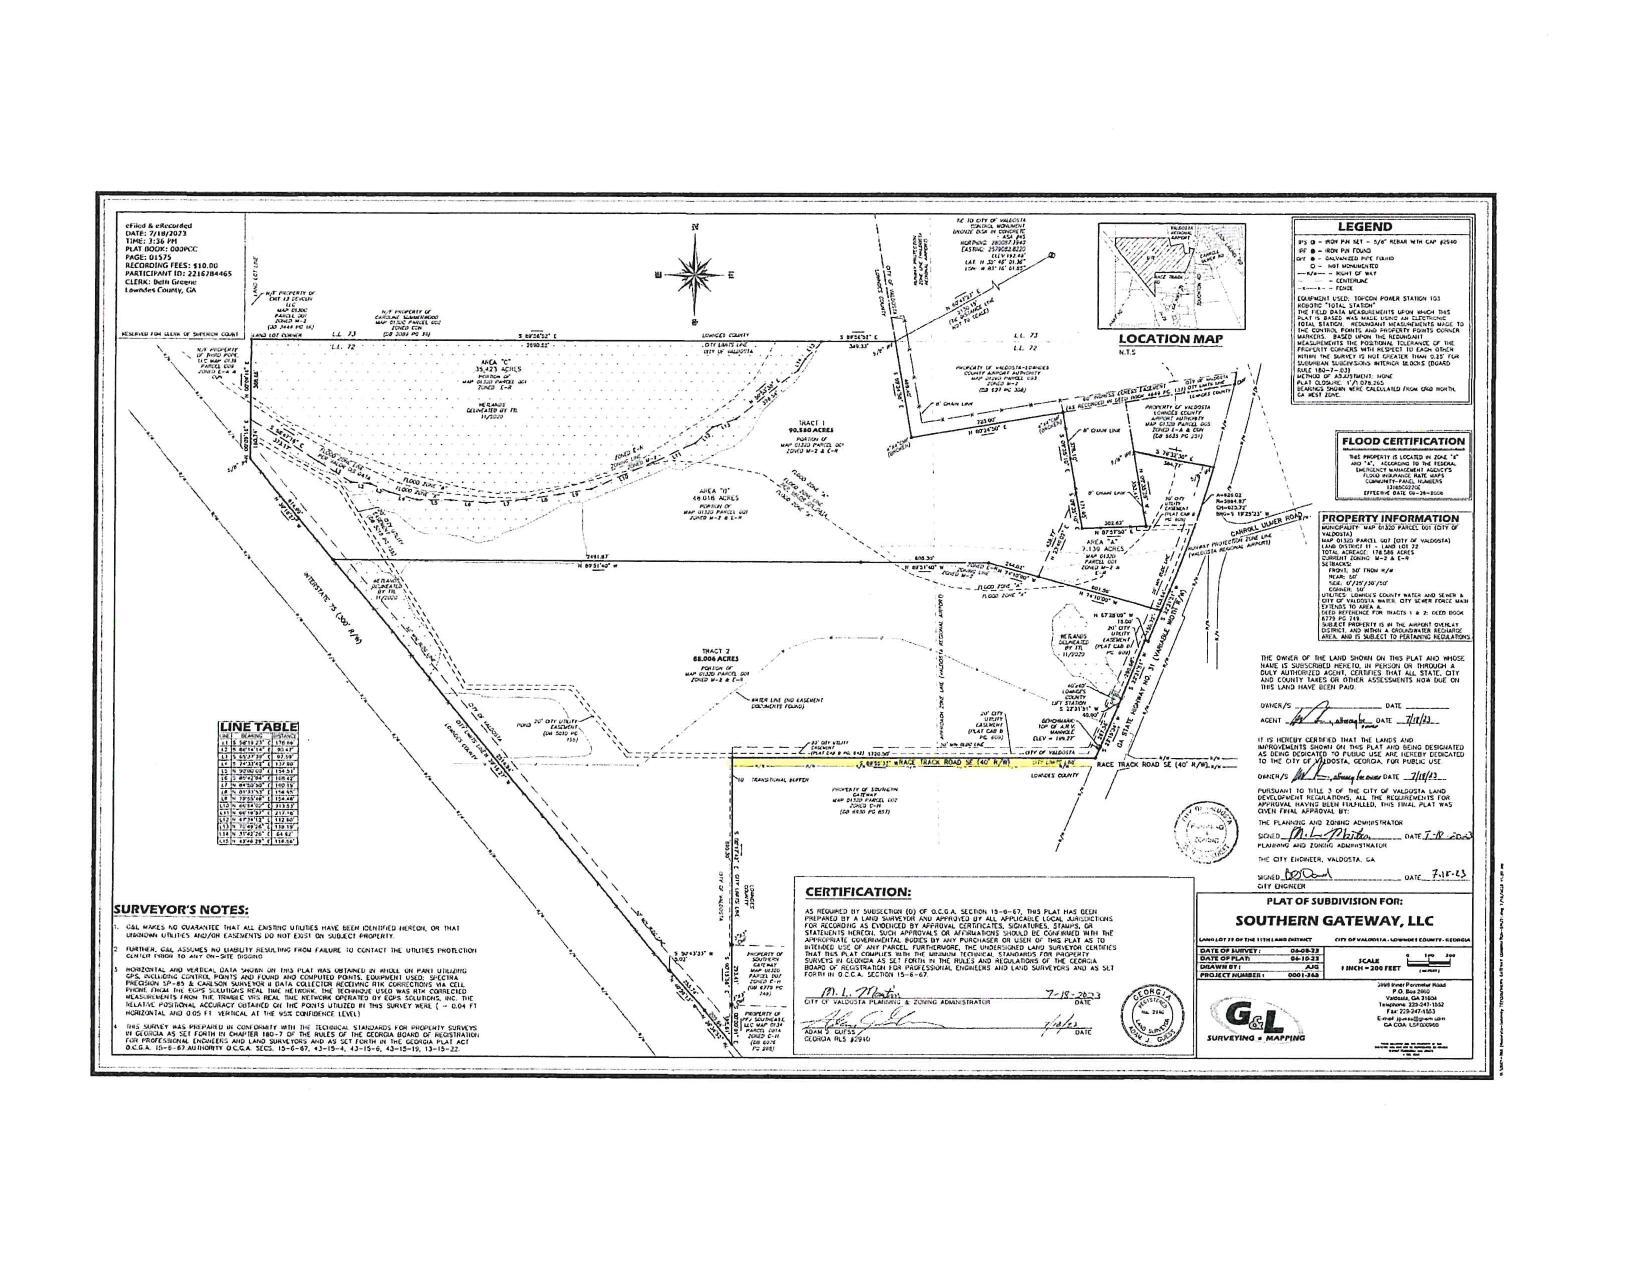 Plat of Subdivision for Southern Gateway, LLC, between I-75 and GA 31